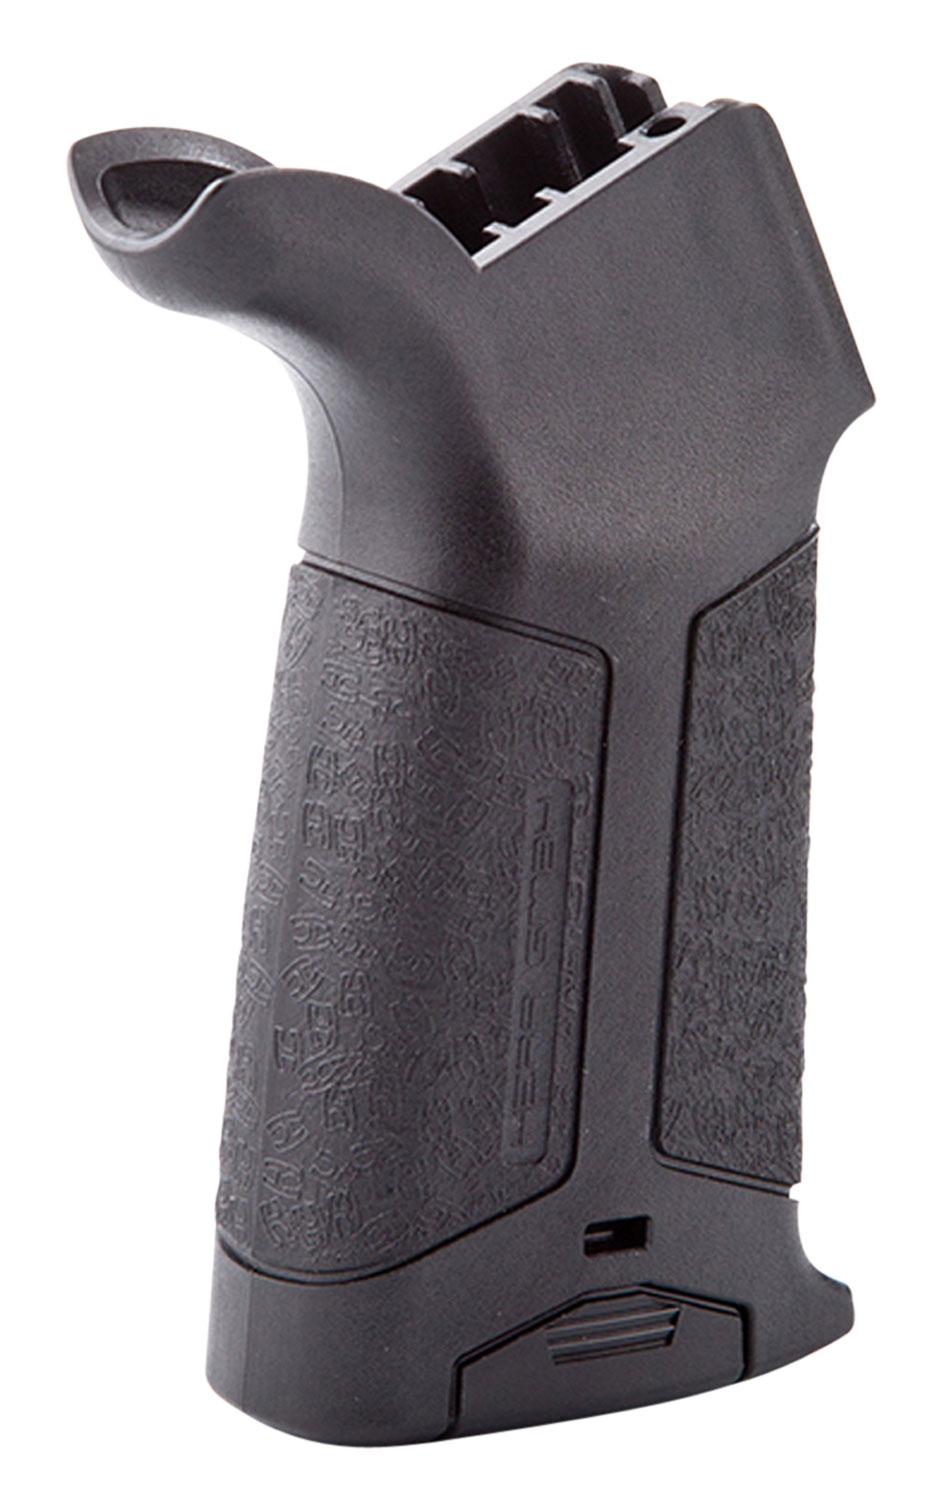 Hera Arms 110801 H15G Pistol Grip Black Polymer with Storage Compartment for AR-15, M4